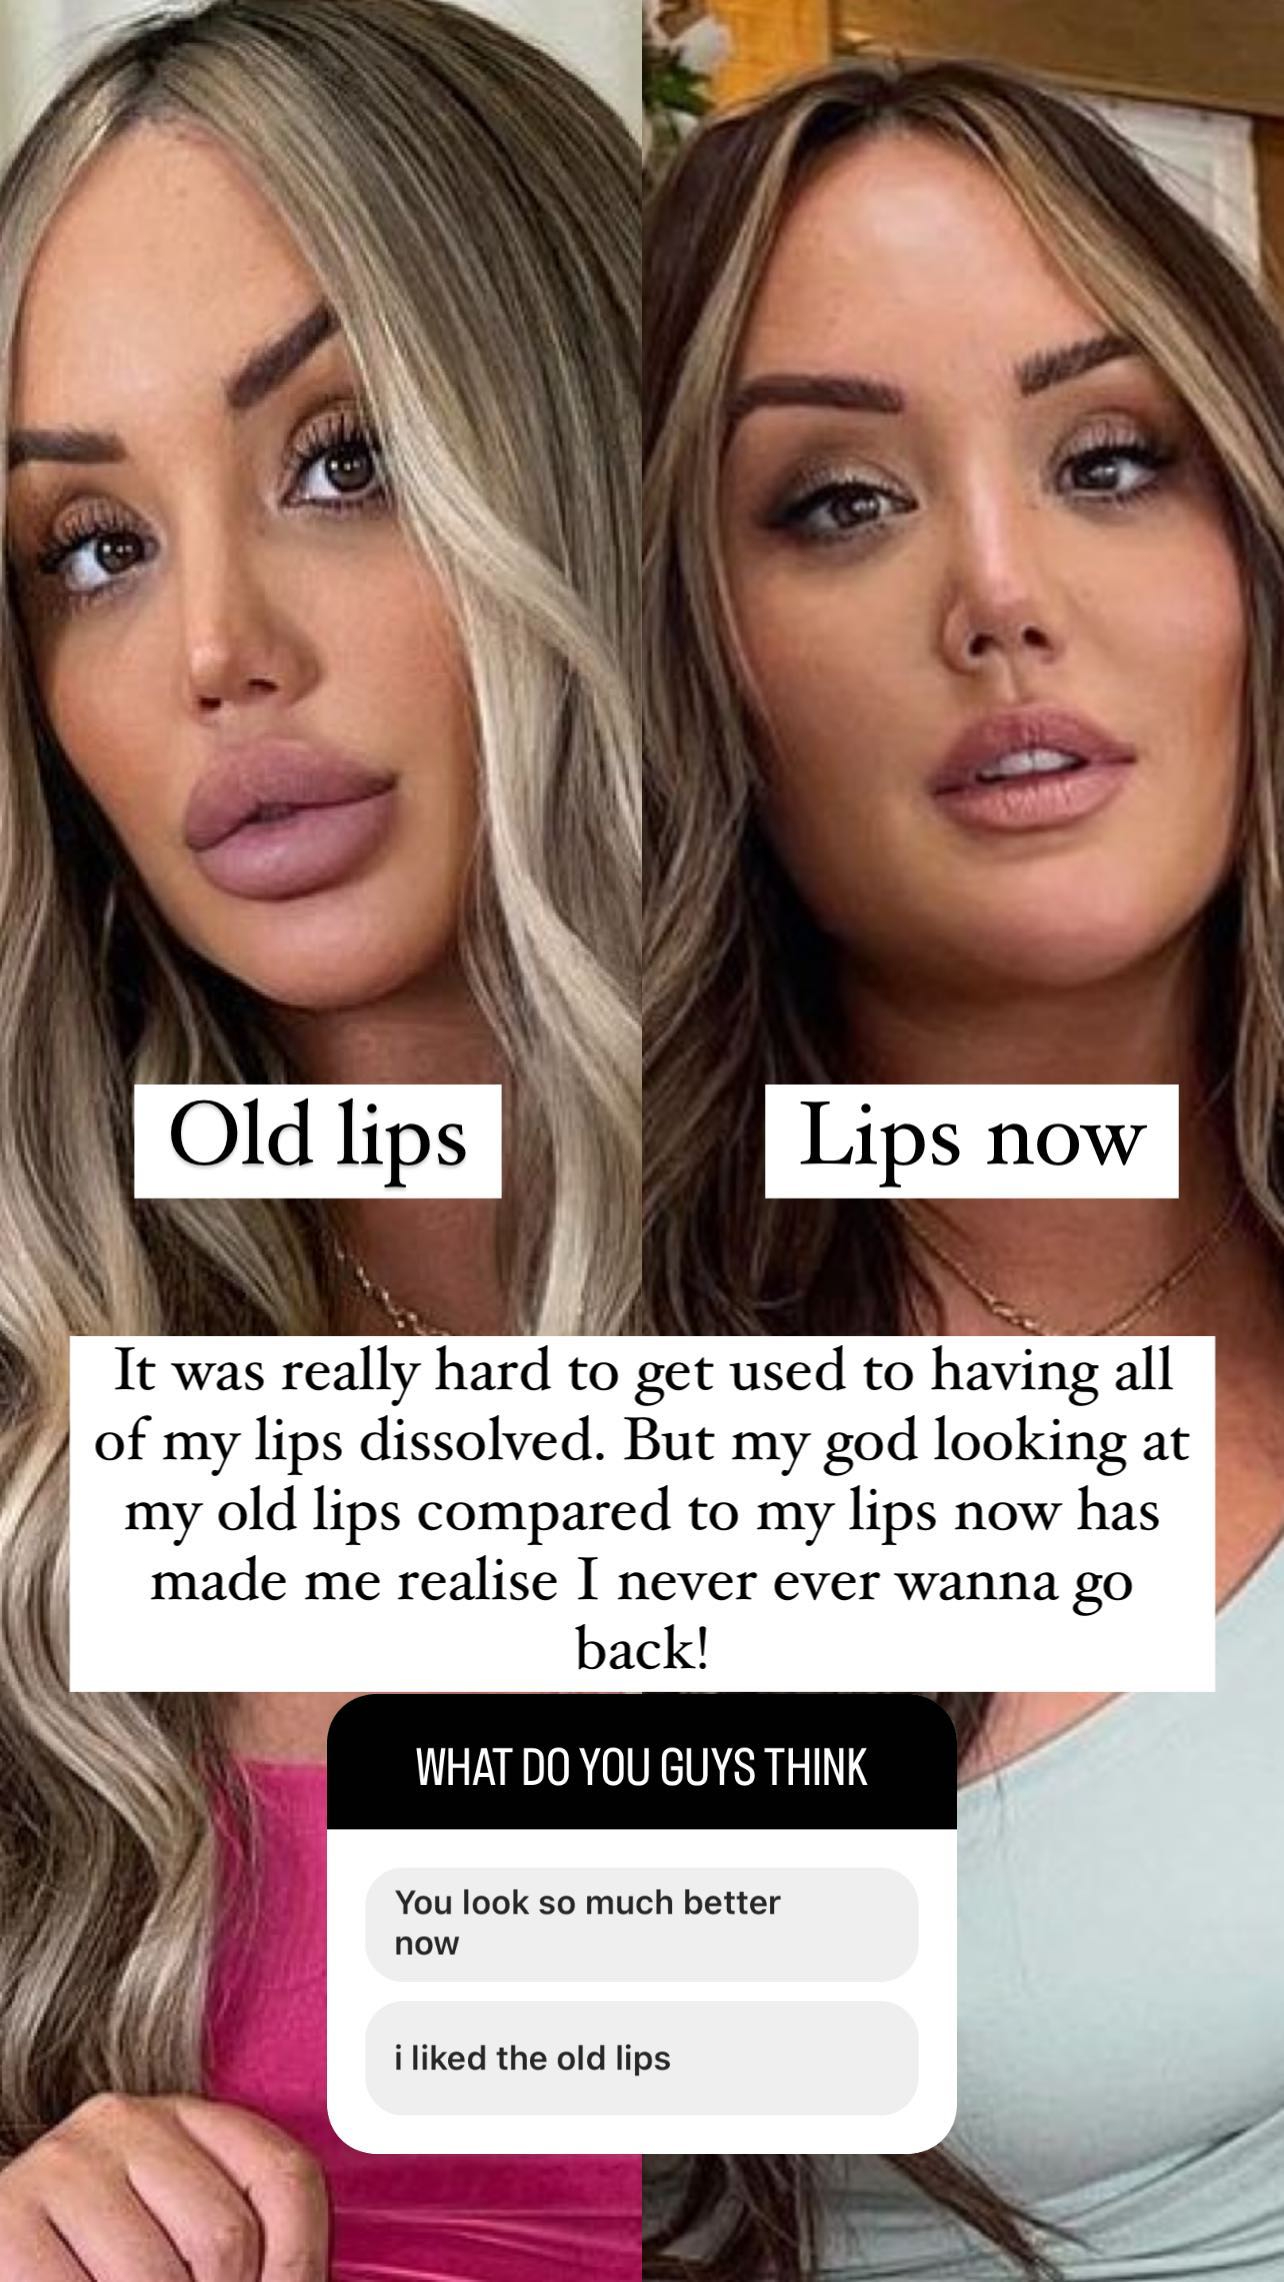 Charlotte Crosby shared before and after snaps of her lips on Instagram